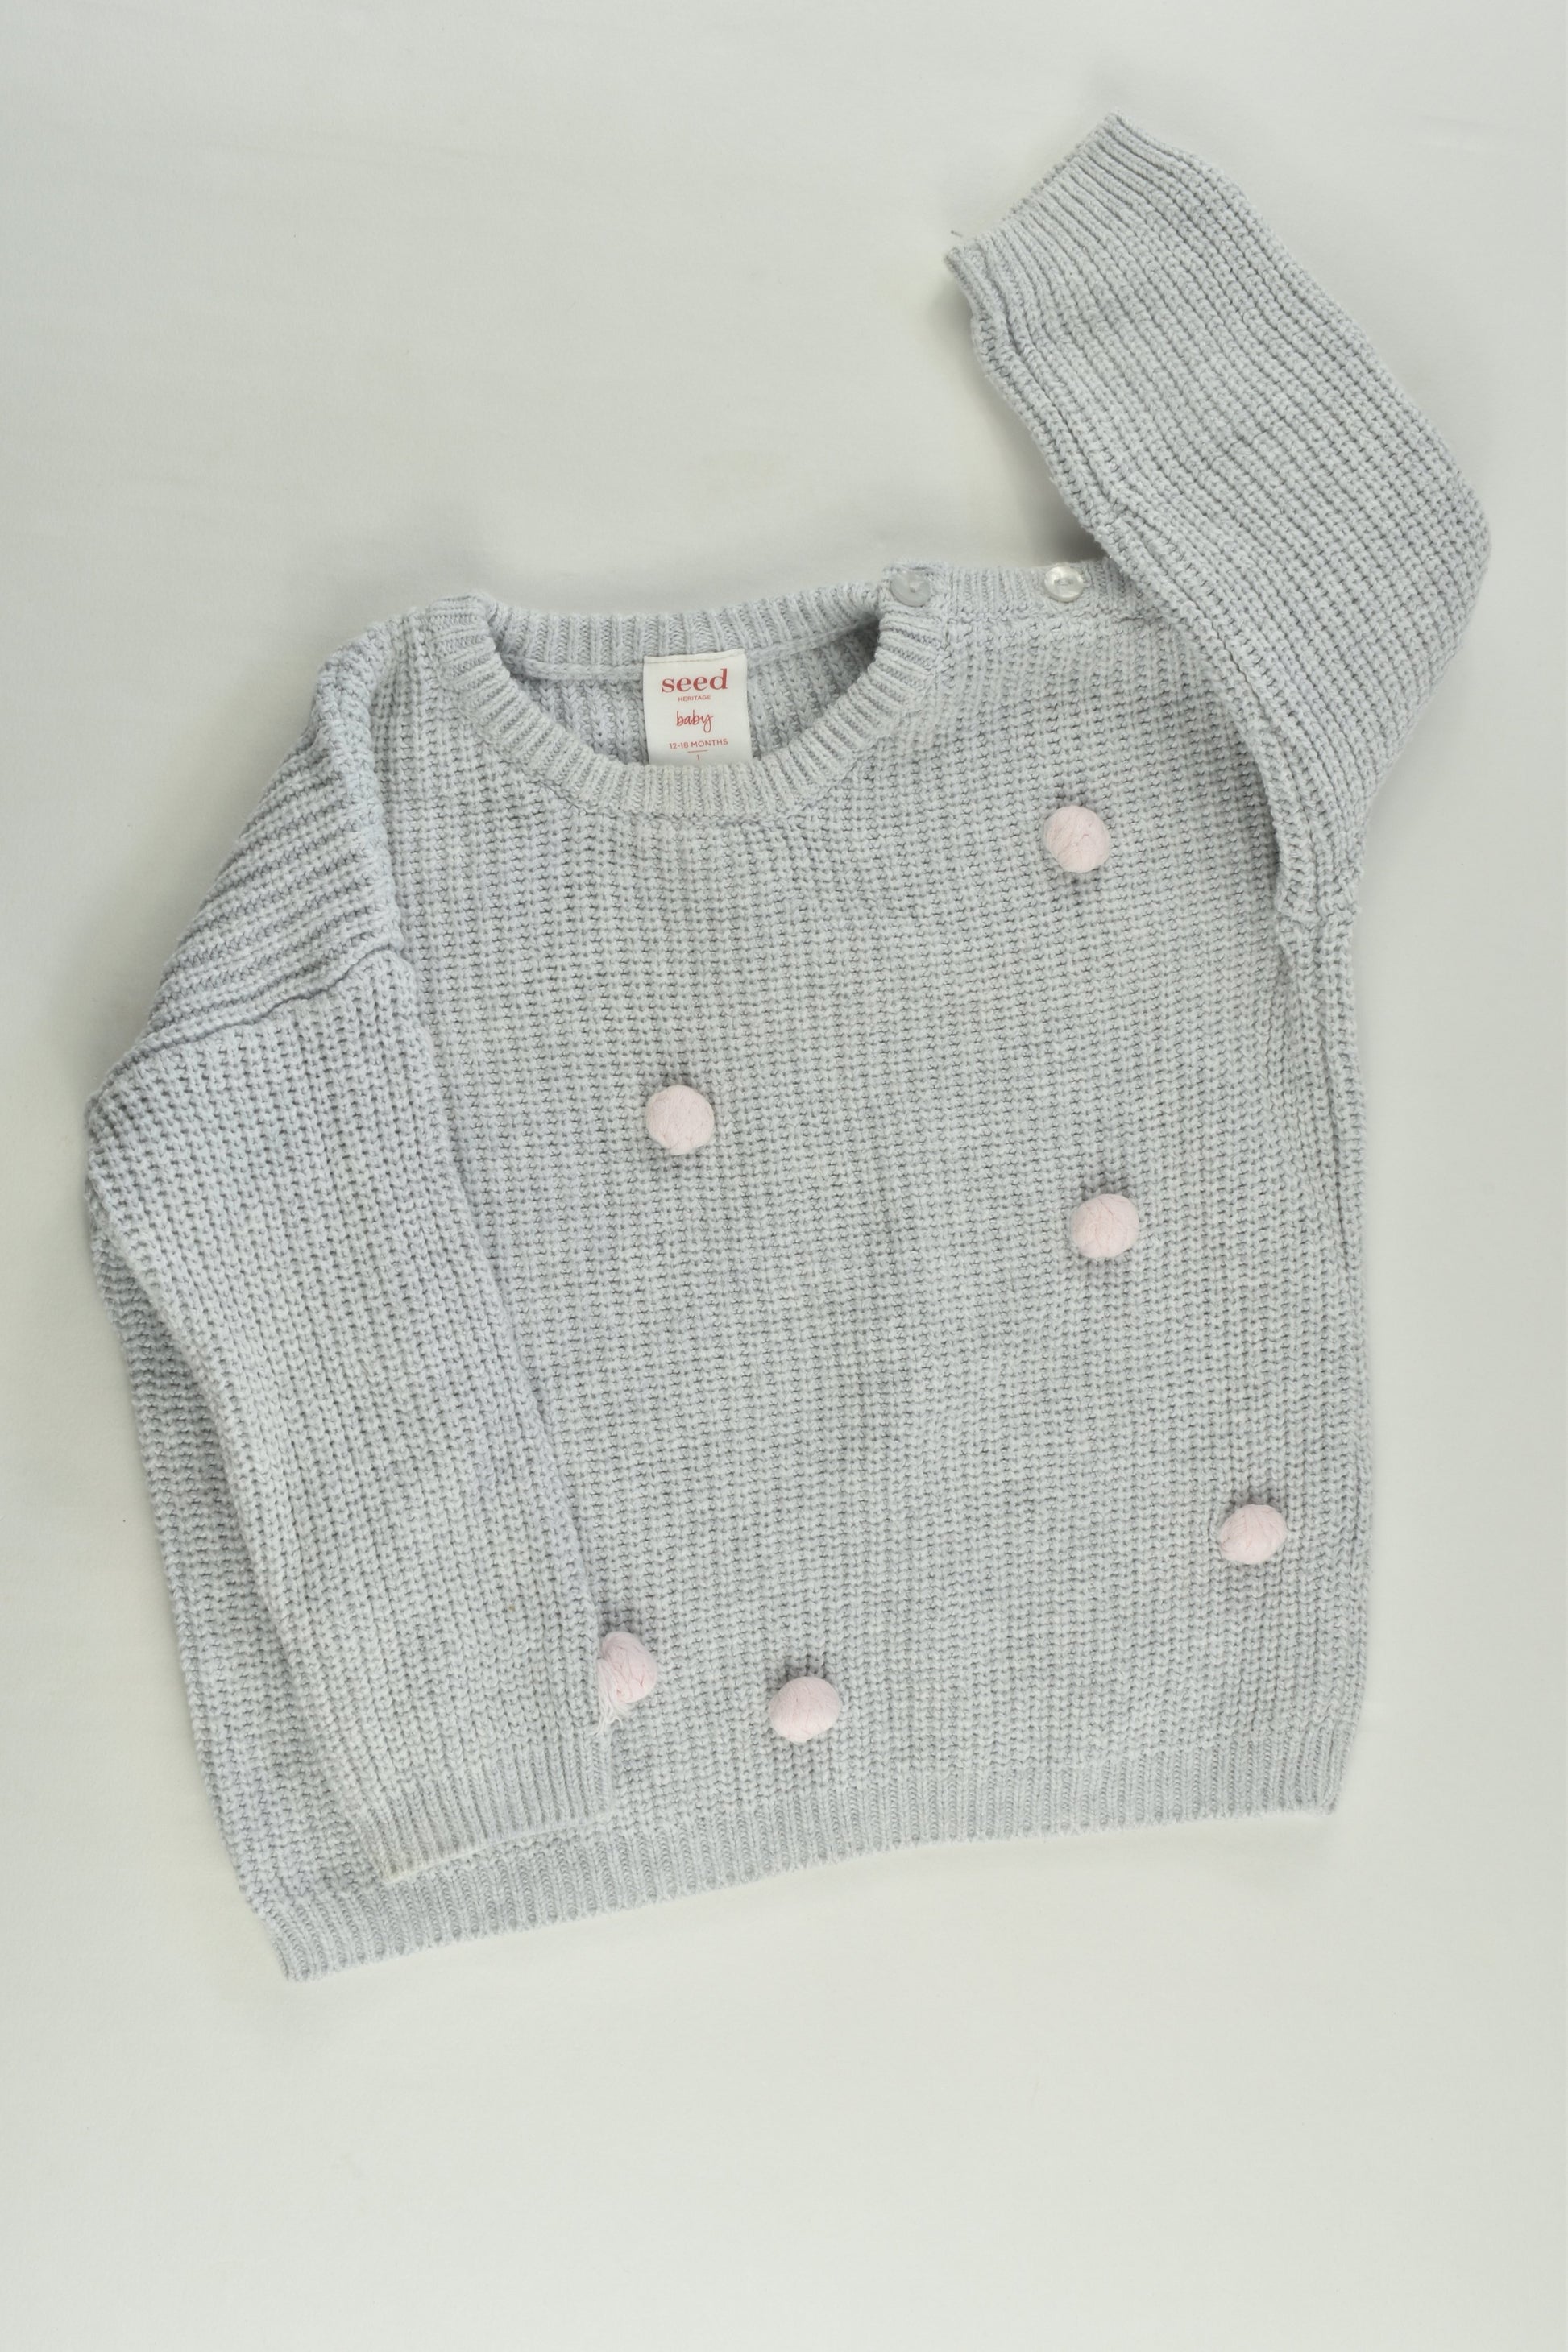 Seed Heritage Size 1 Knitted Pom Pom Jumper